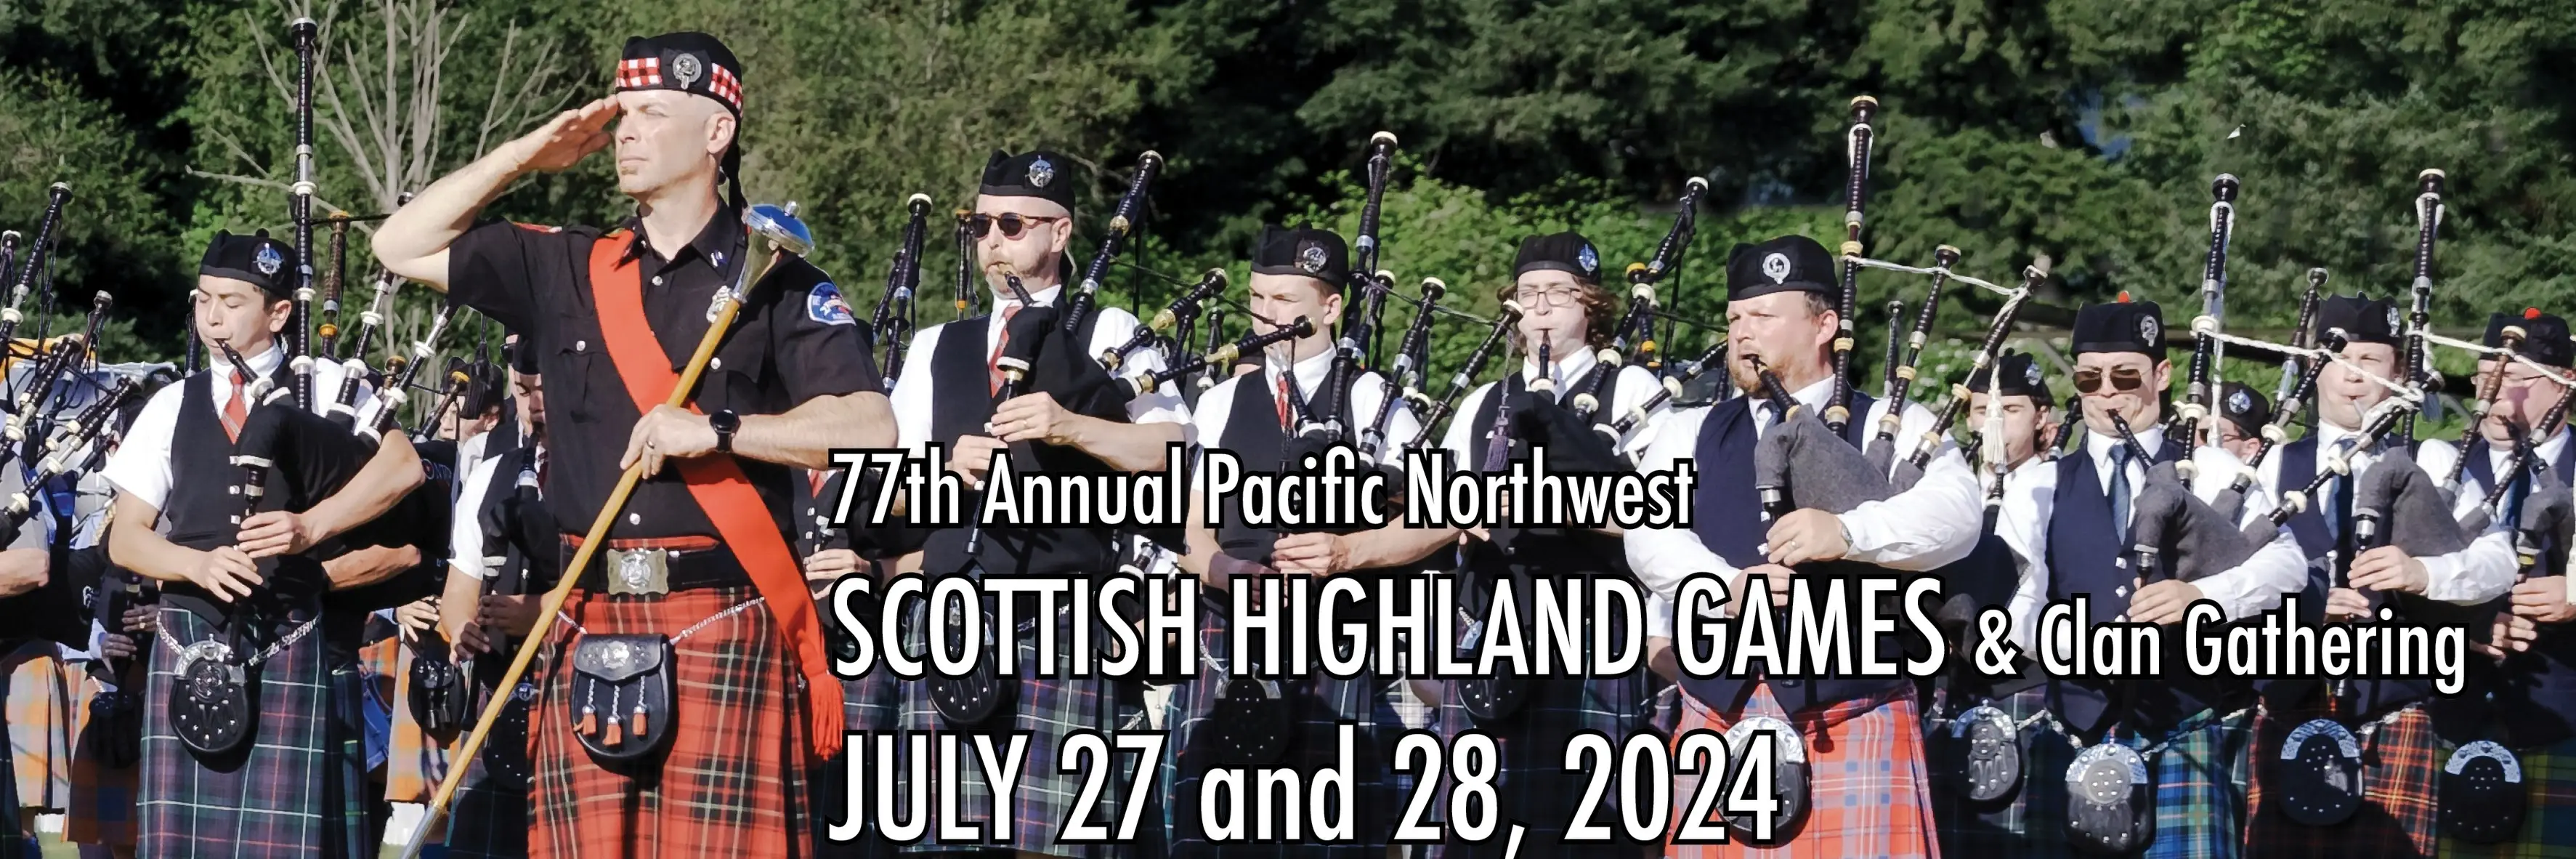 Volunteers needed for PNW Scottish Highland Games and Clan Gathering